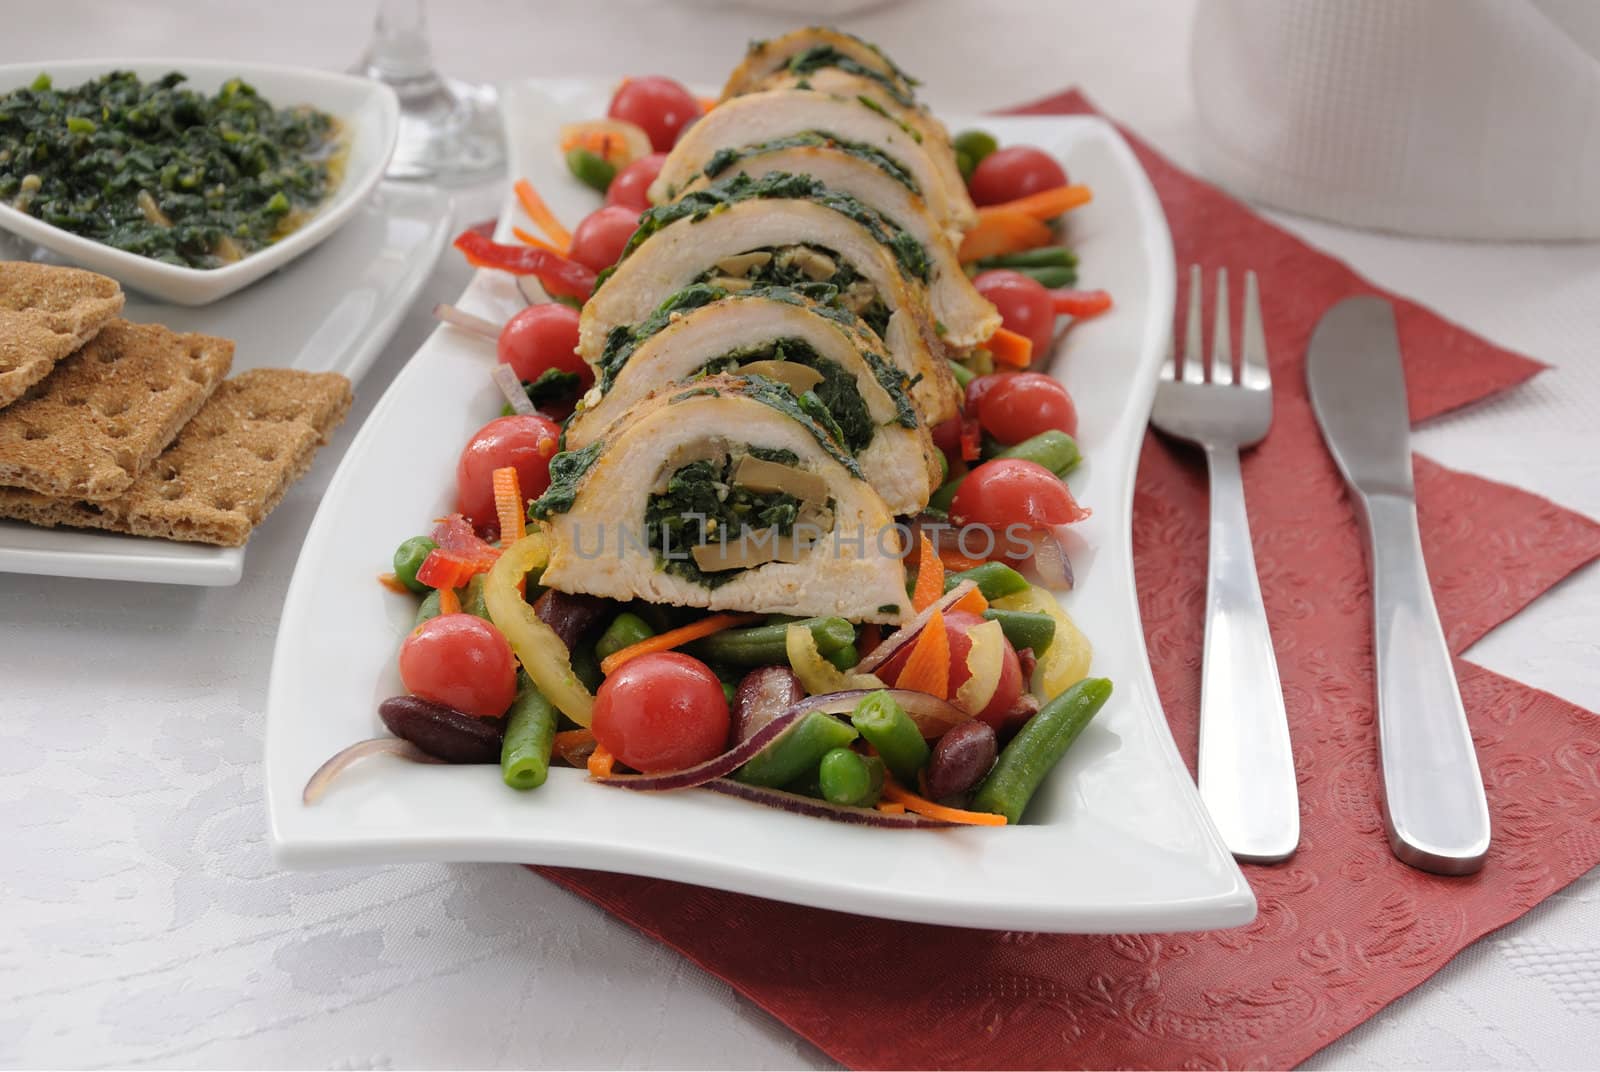 Chicken roulade with spinach and mushrooms with vegetables by Apolonia